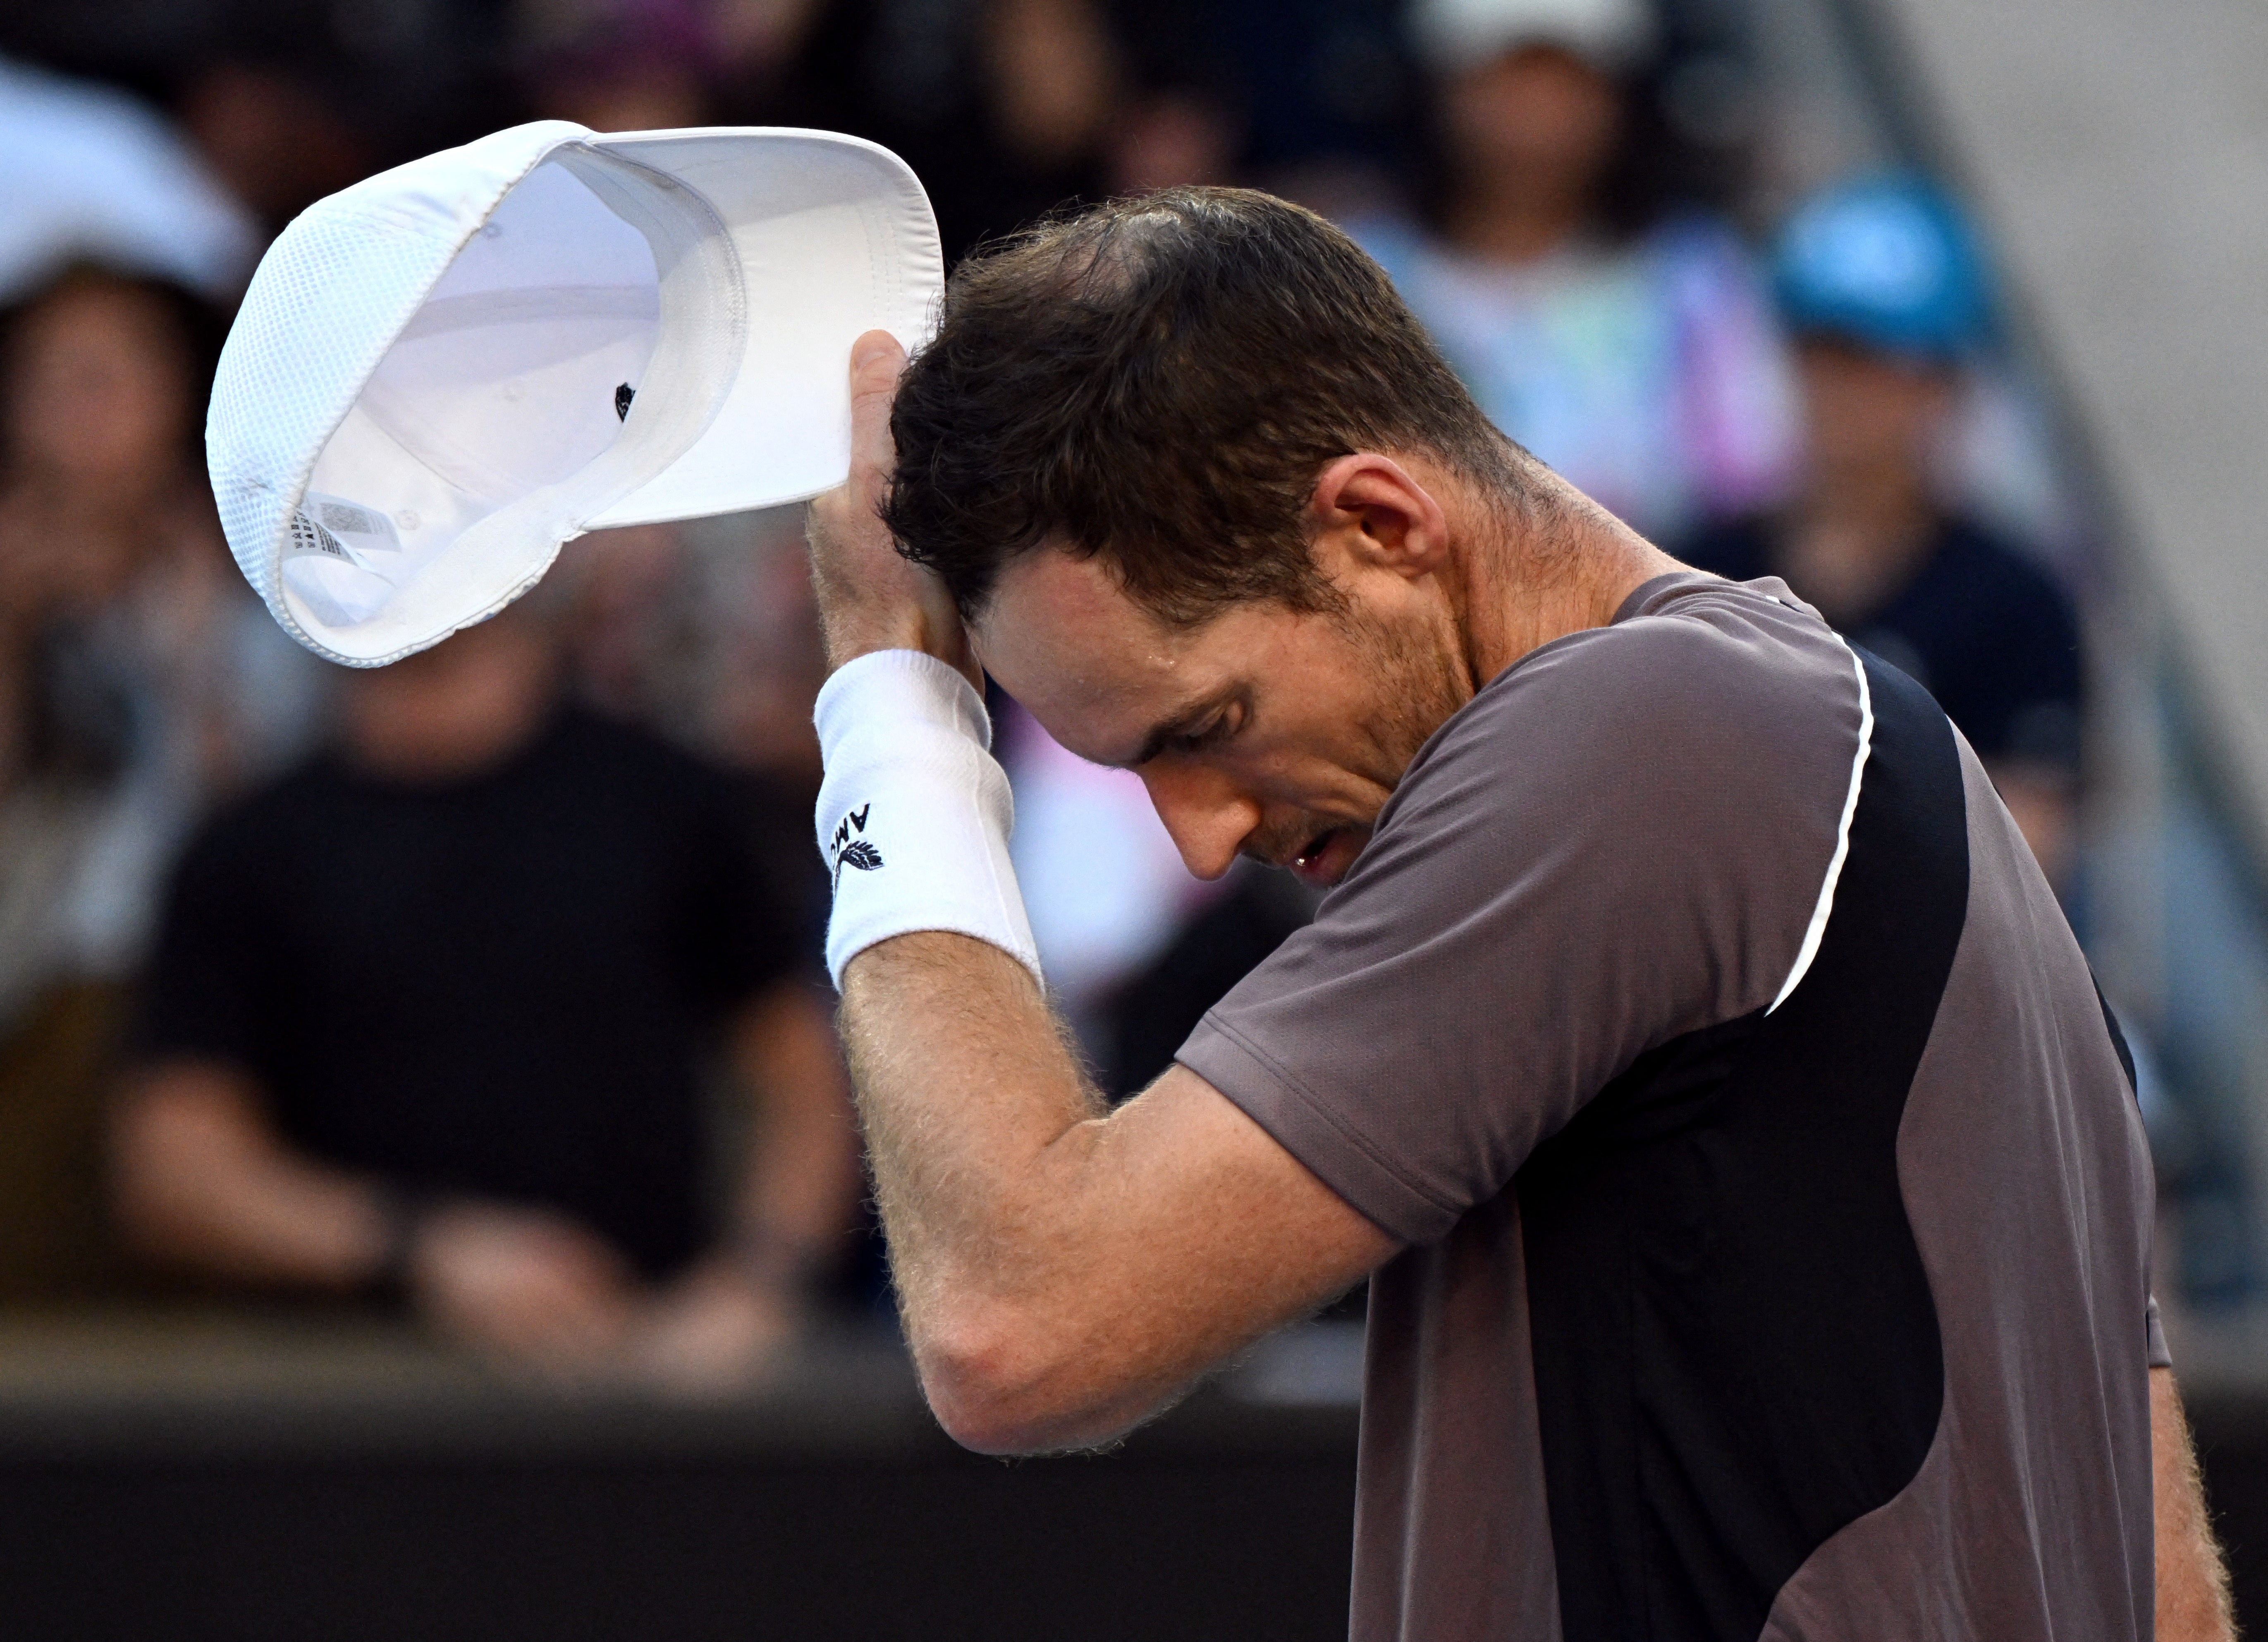 Murray questioned his future after his first-round defeat